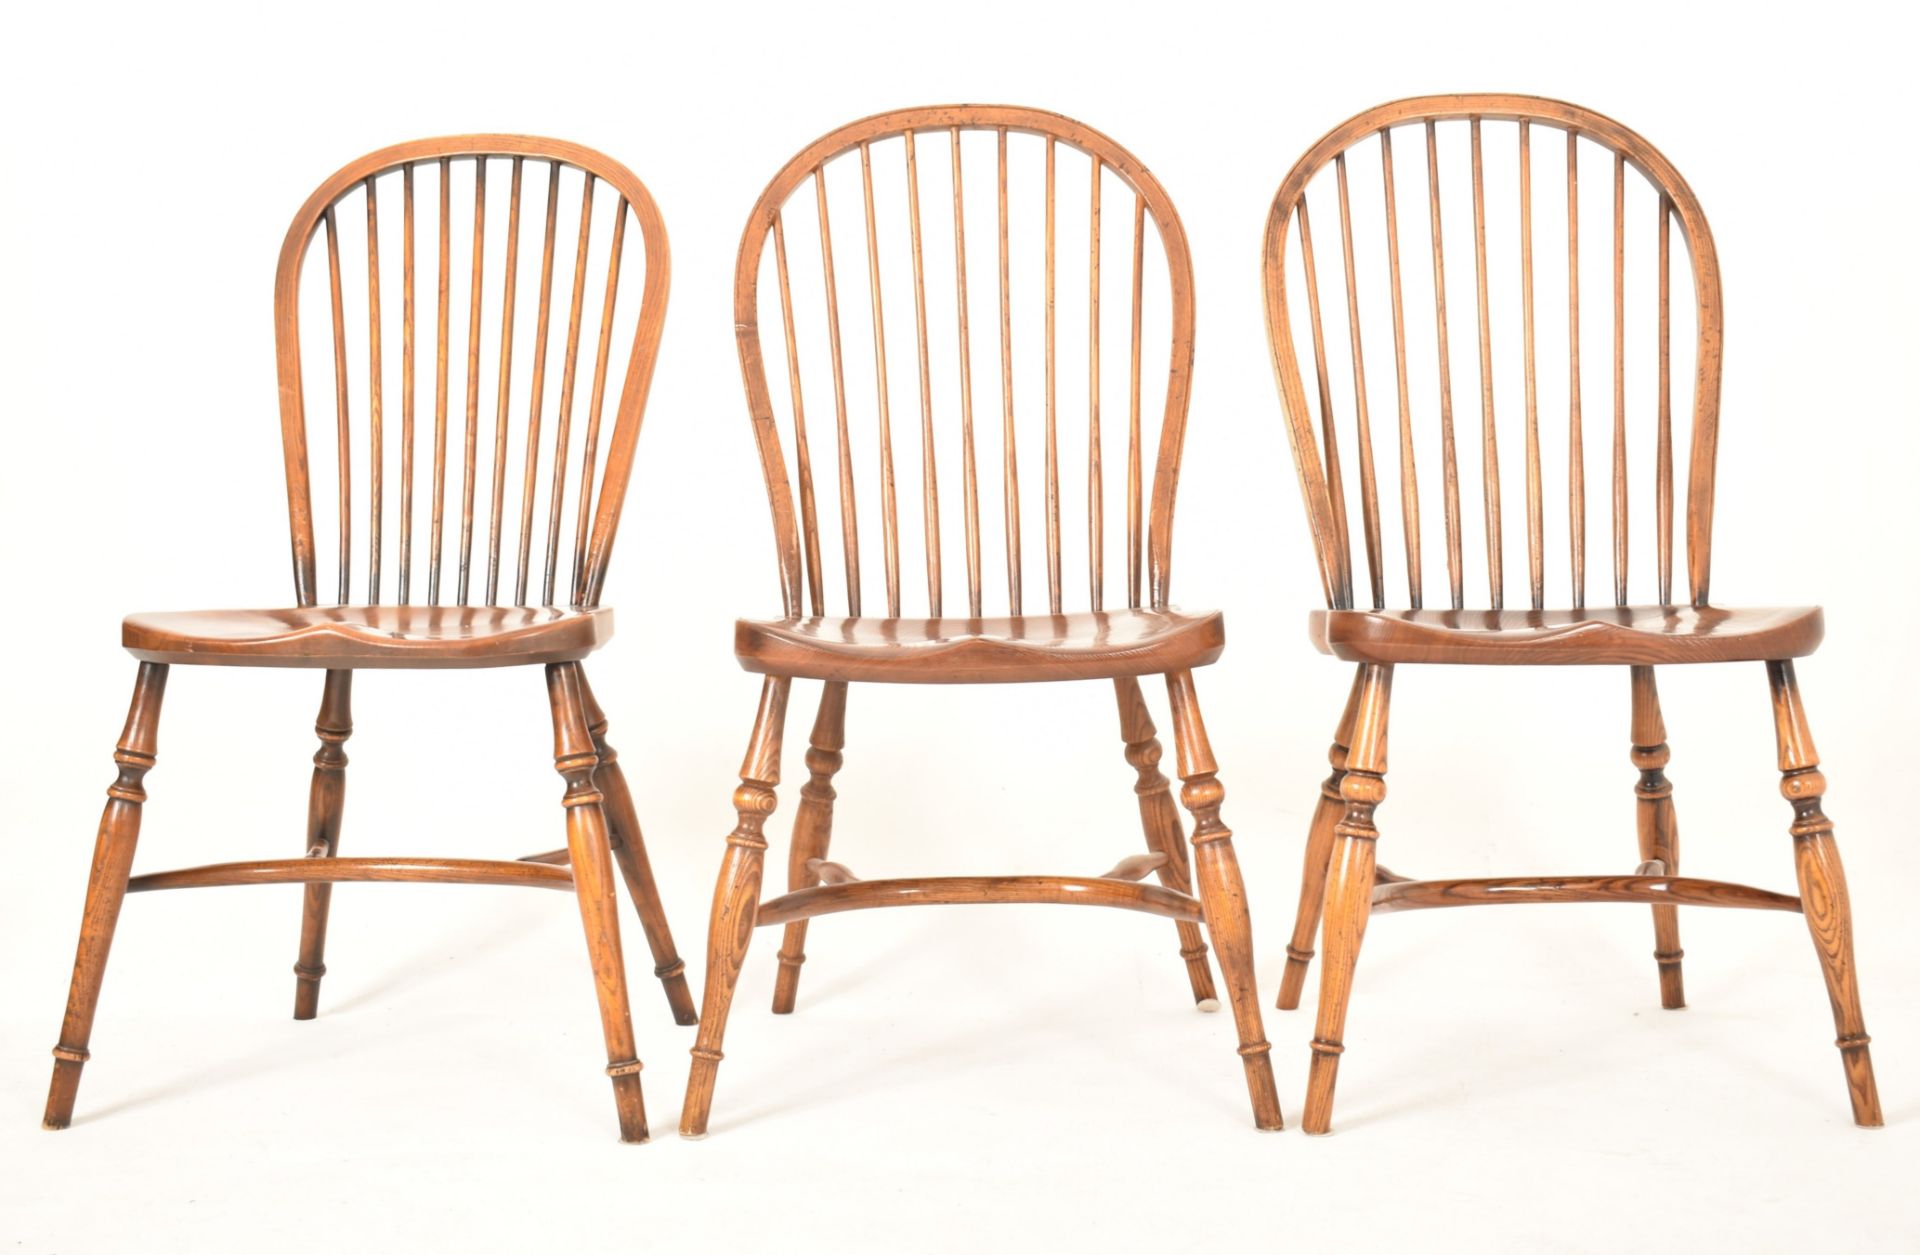 STEWART LINFORD FURNITURE - SIX WINDSOR STYLE STICK BACK CHAIRS - Image 8 of 8